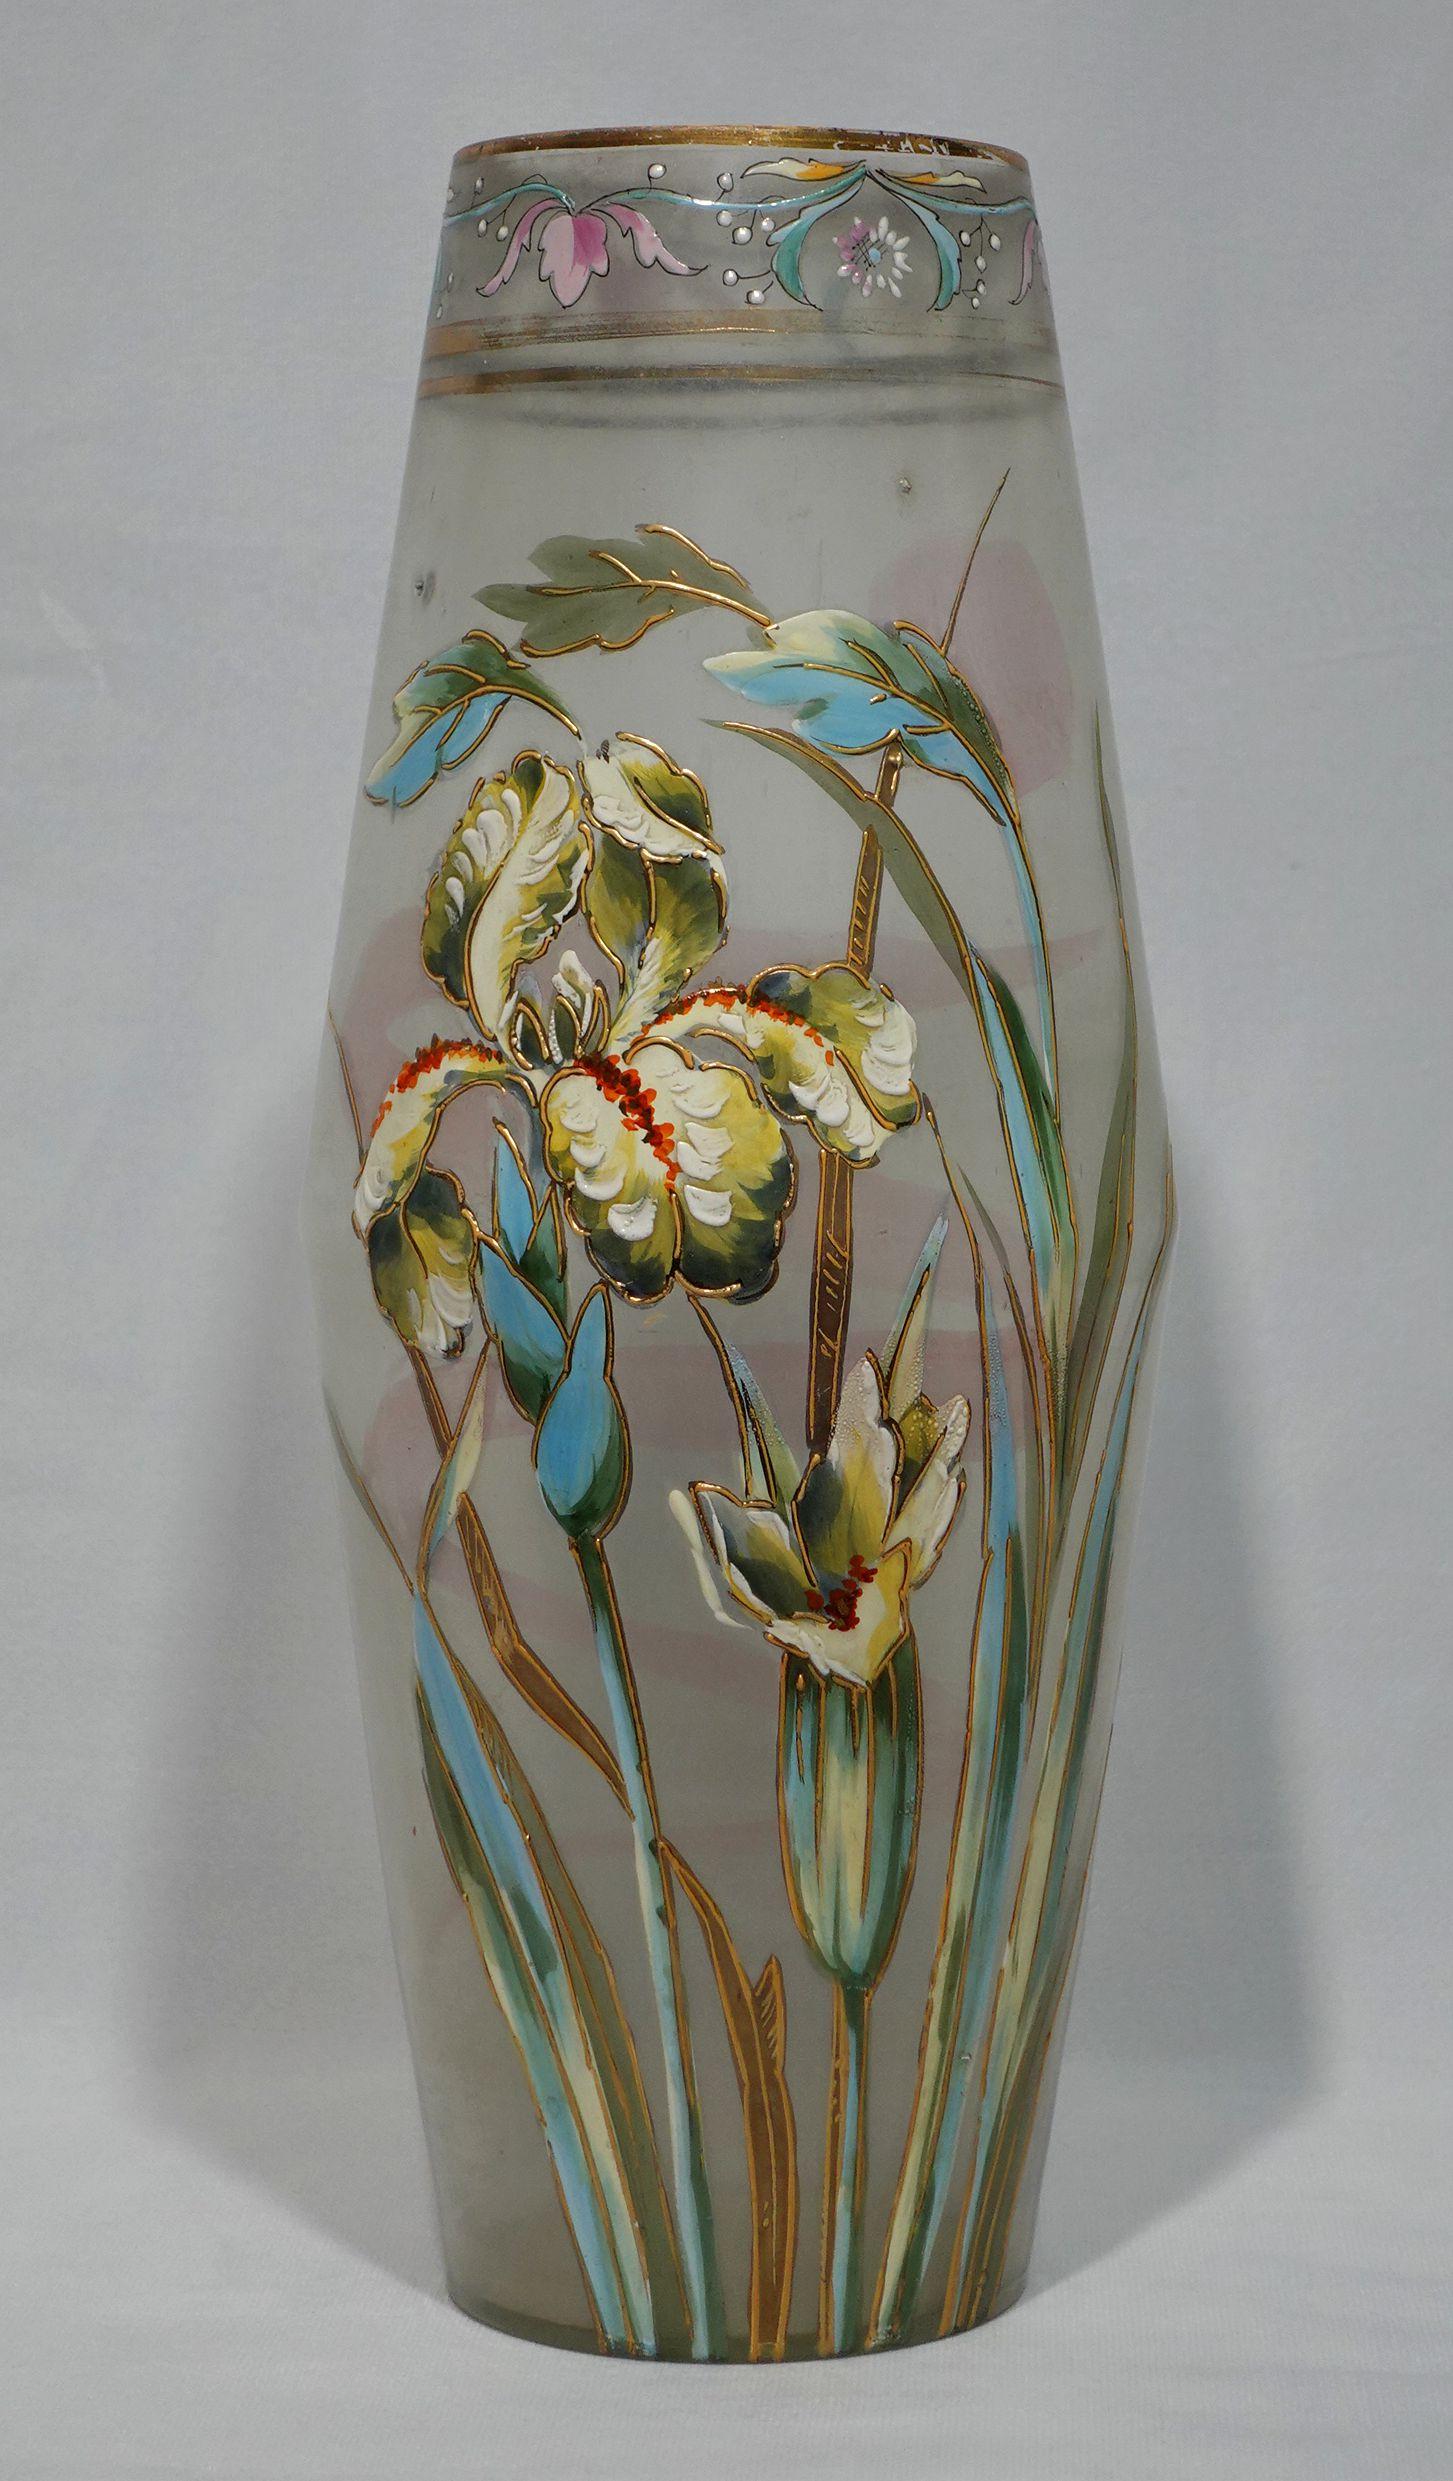 This is an exceptional example of early French Mont Joye art glass. It is Circa 1910. The vase has a floral enameled motif in the form of pansies leaves, and gold rims. The pansies have a deep rich vibrant color and are accented by an intricate gold